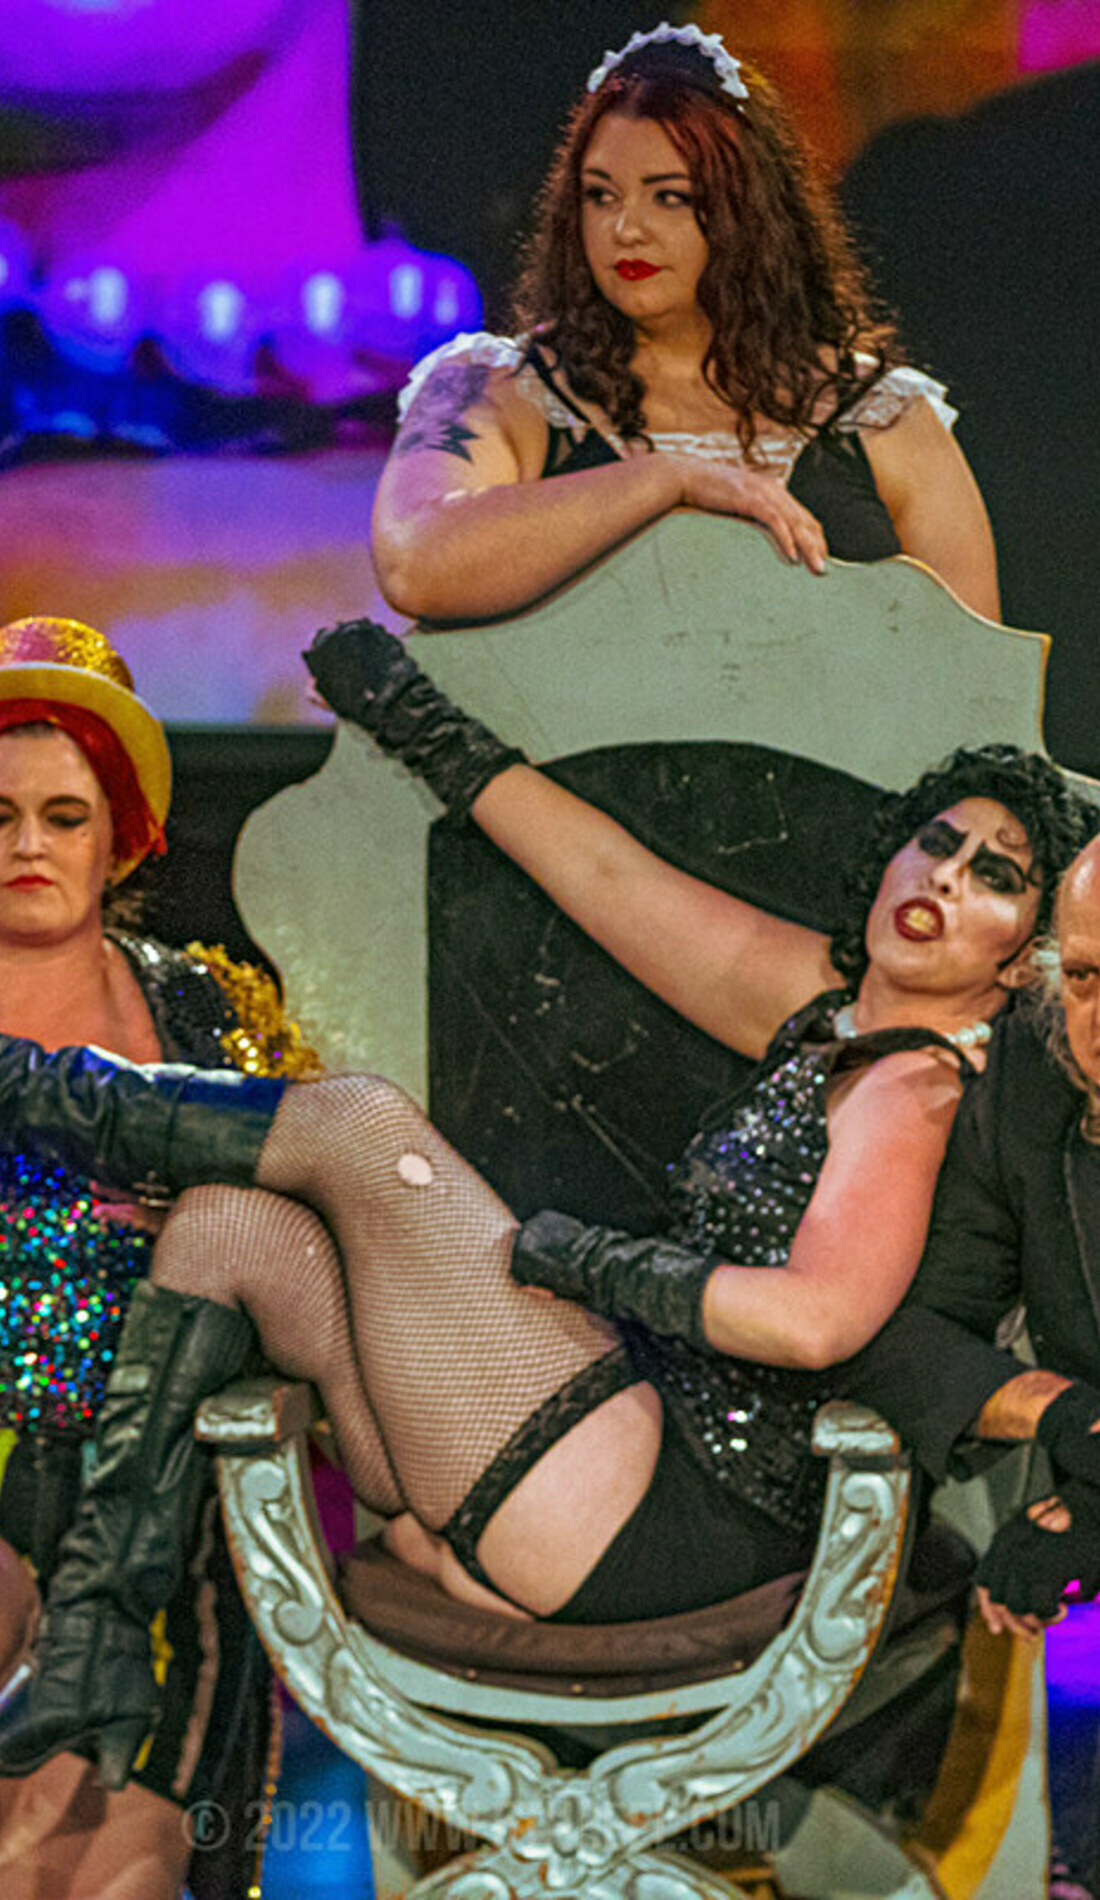 A The Rocky Horror Picture Show live event